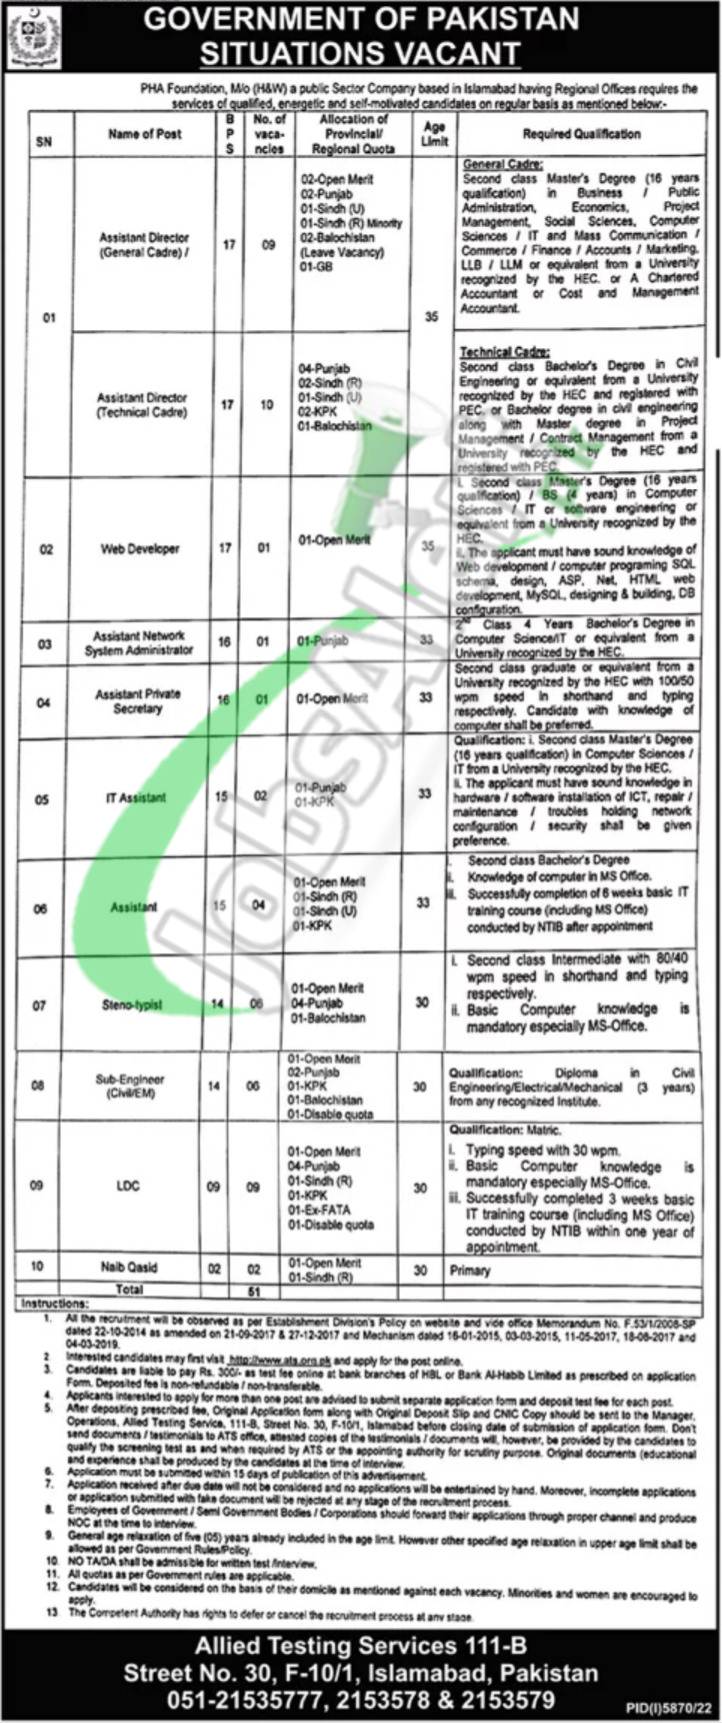 Ministry of Housing & Works Islamabad Jobs